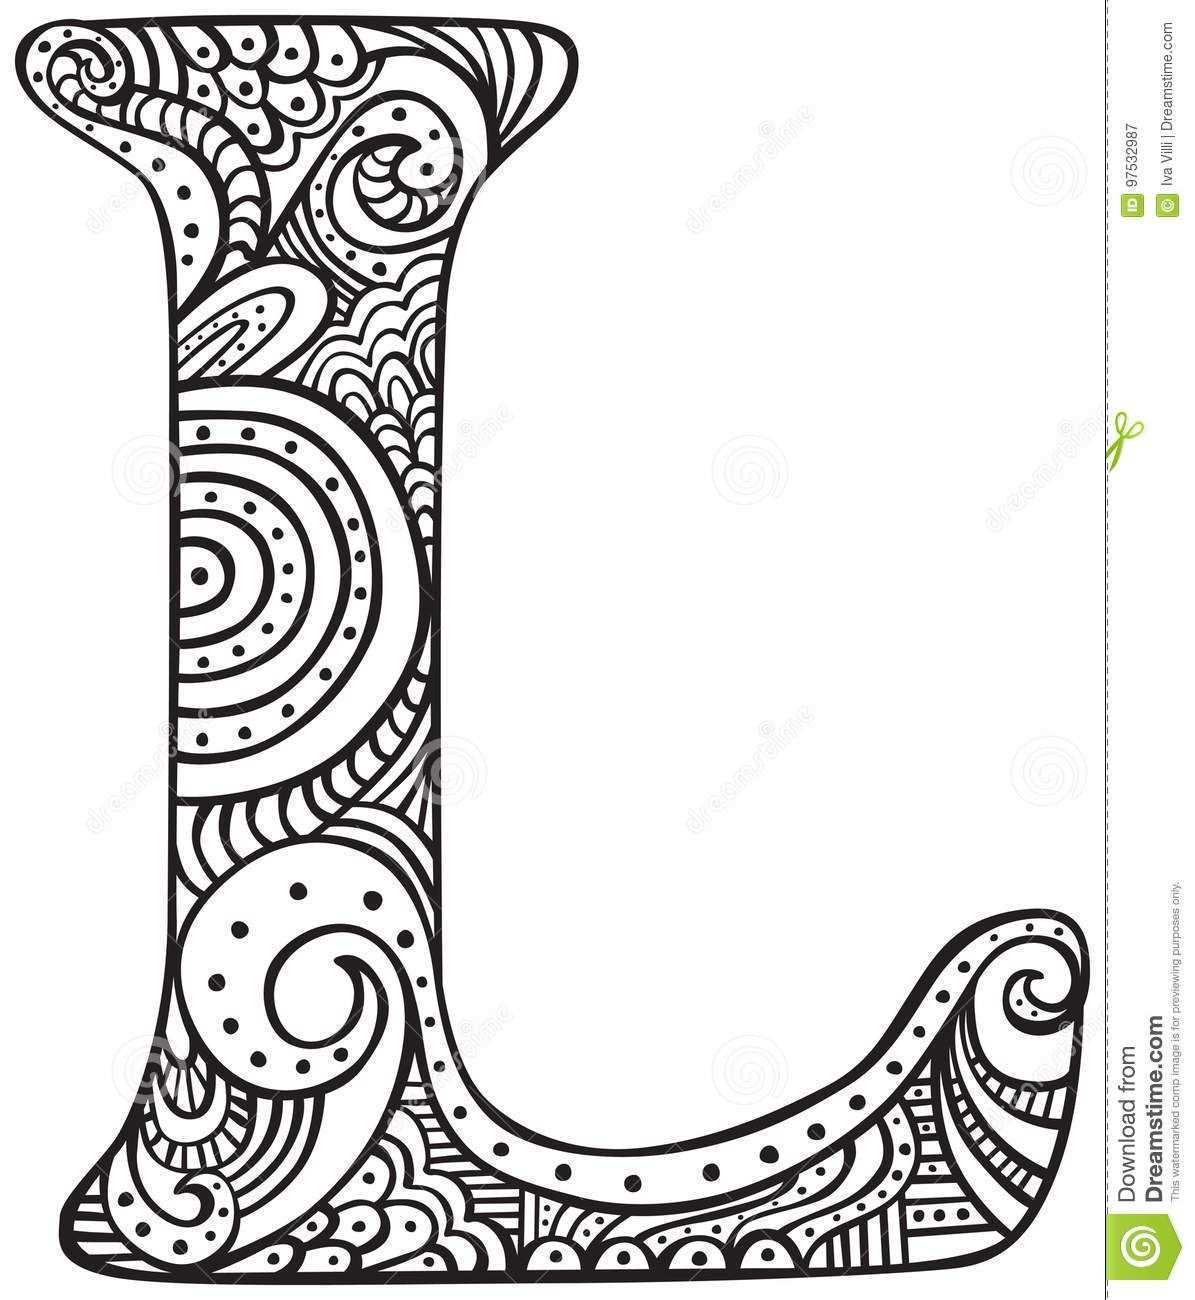 Illustration About Hand Drawn Capital Letter L In Black Coloring Sheet For Adults Ill